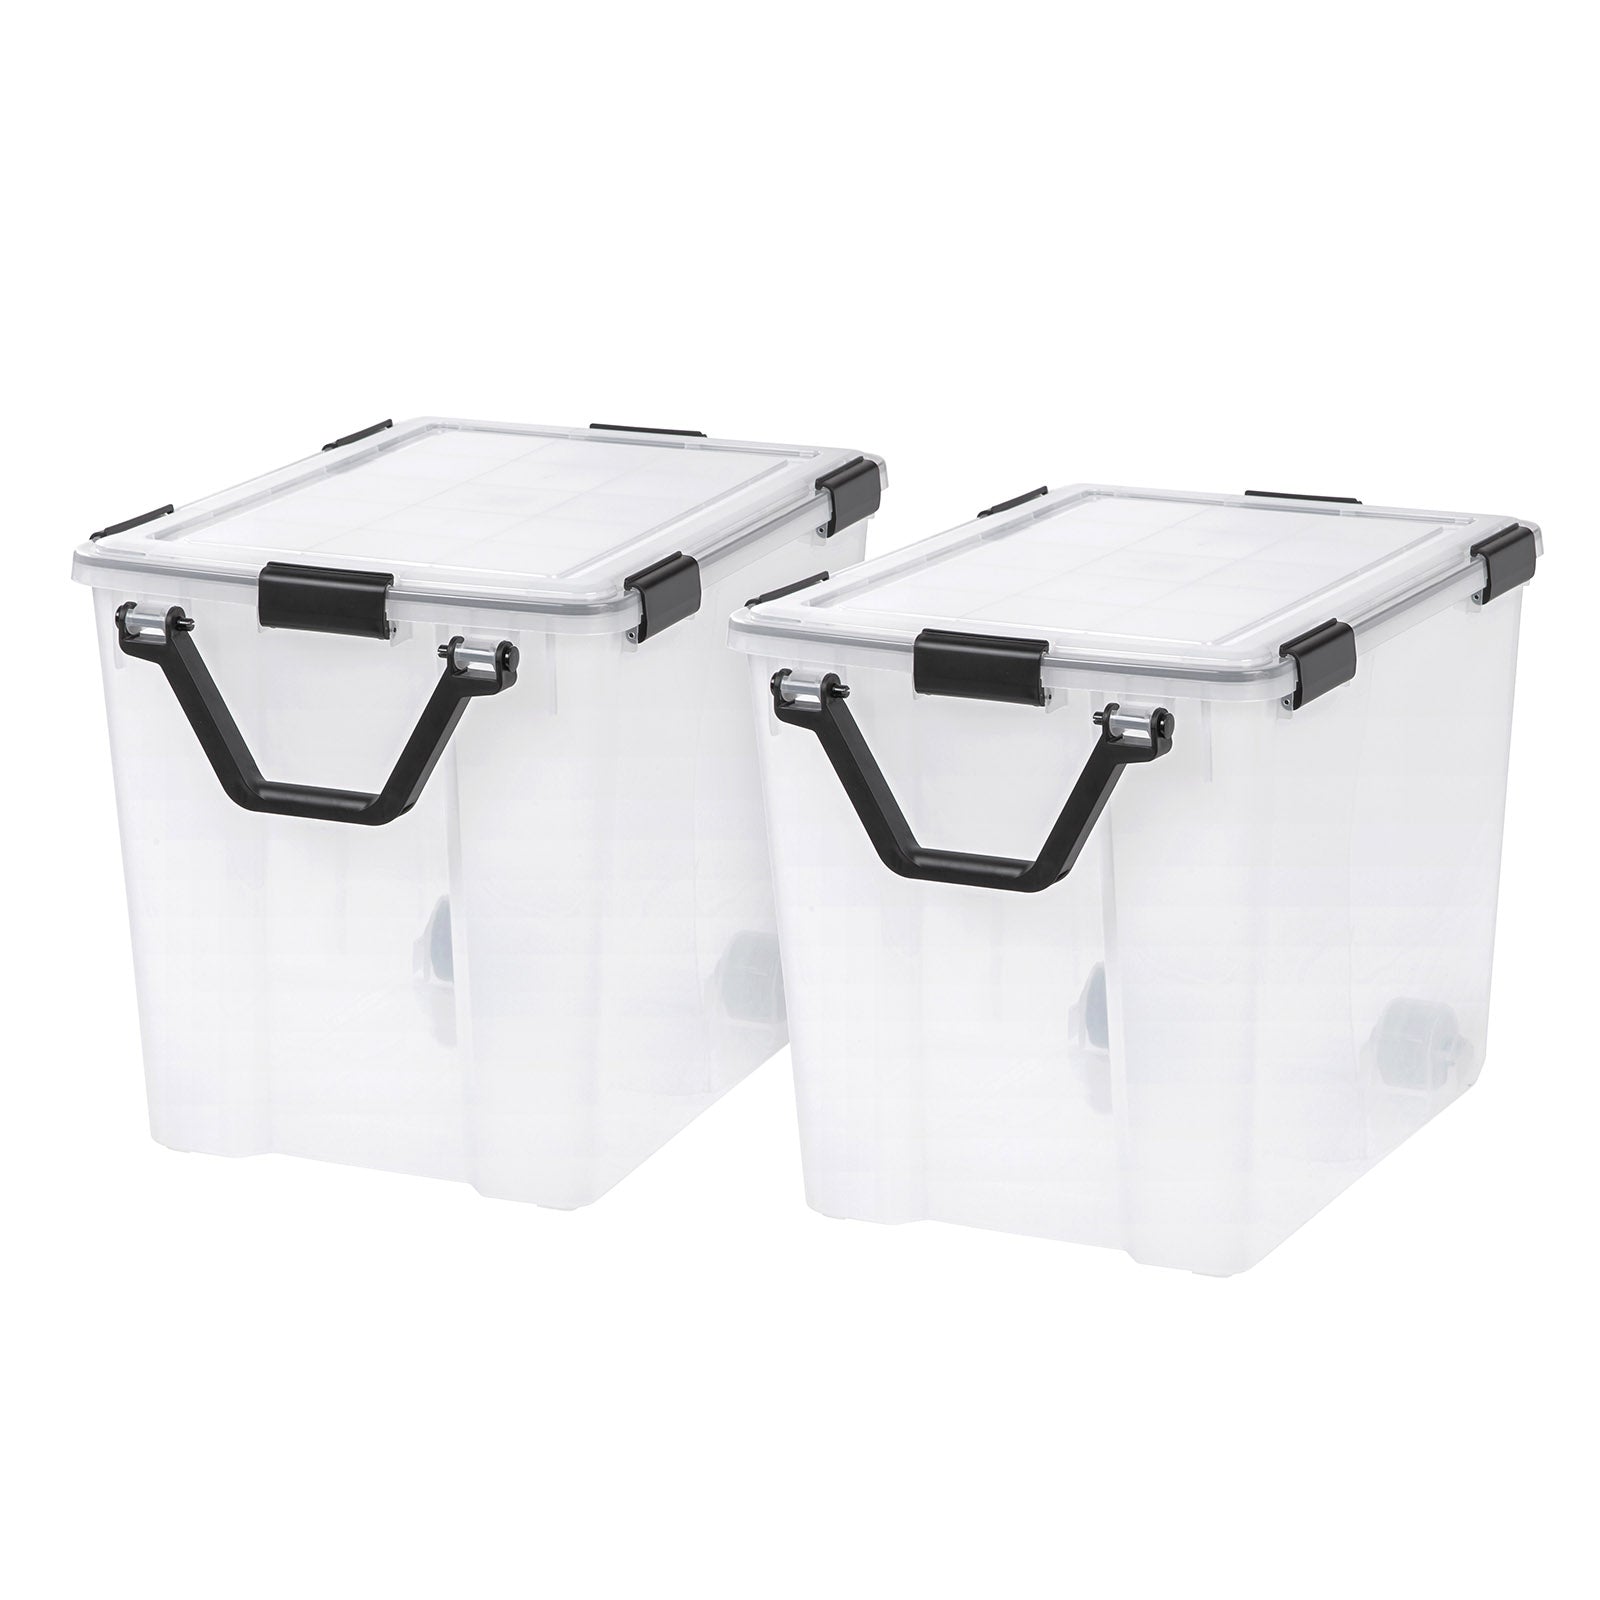 Iris USA 30 Quart Weatherpro Plastic Storage Box with Durable Lid and Seal and Secure Latching Buckles, Clear with Blue Buckles, Weathertight, 3 Pack